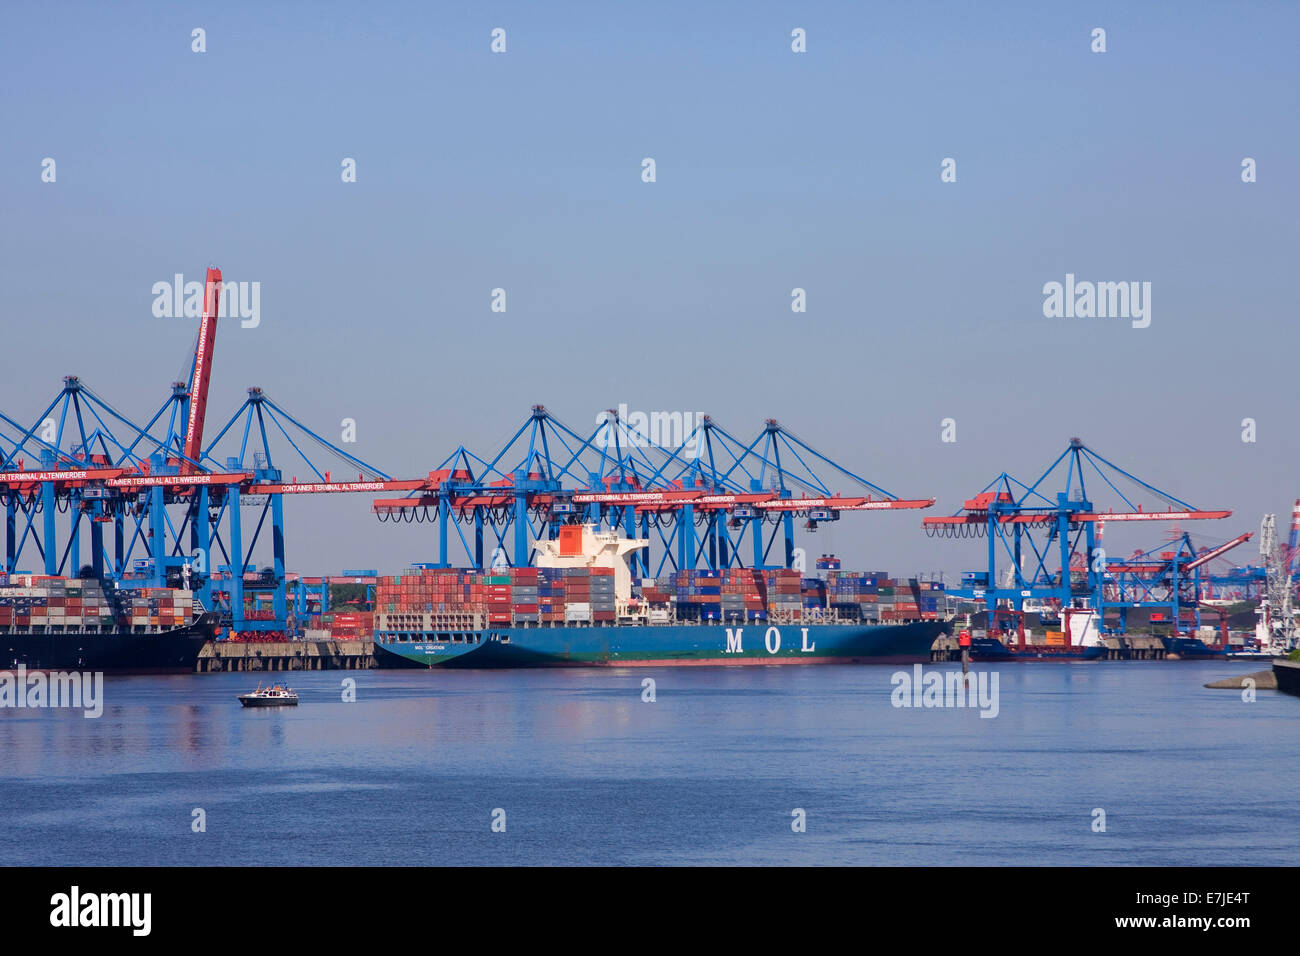 Complex, federal republic, container, container port, container ships, container terminal, German, Germany, euroquay, Europe, ci Stock Photo